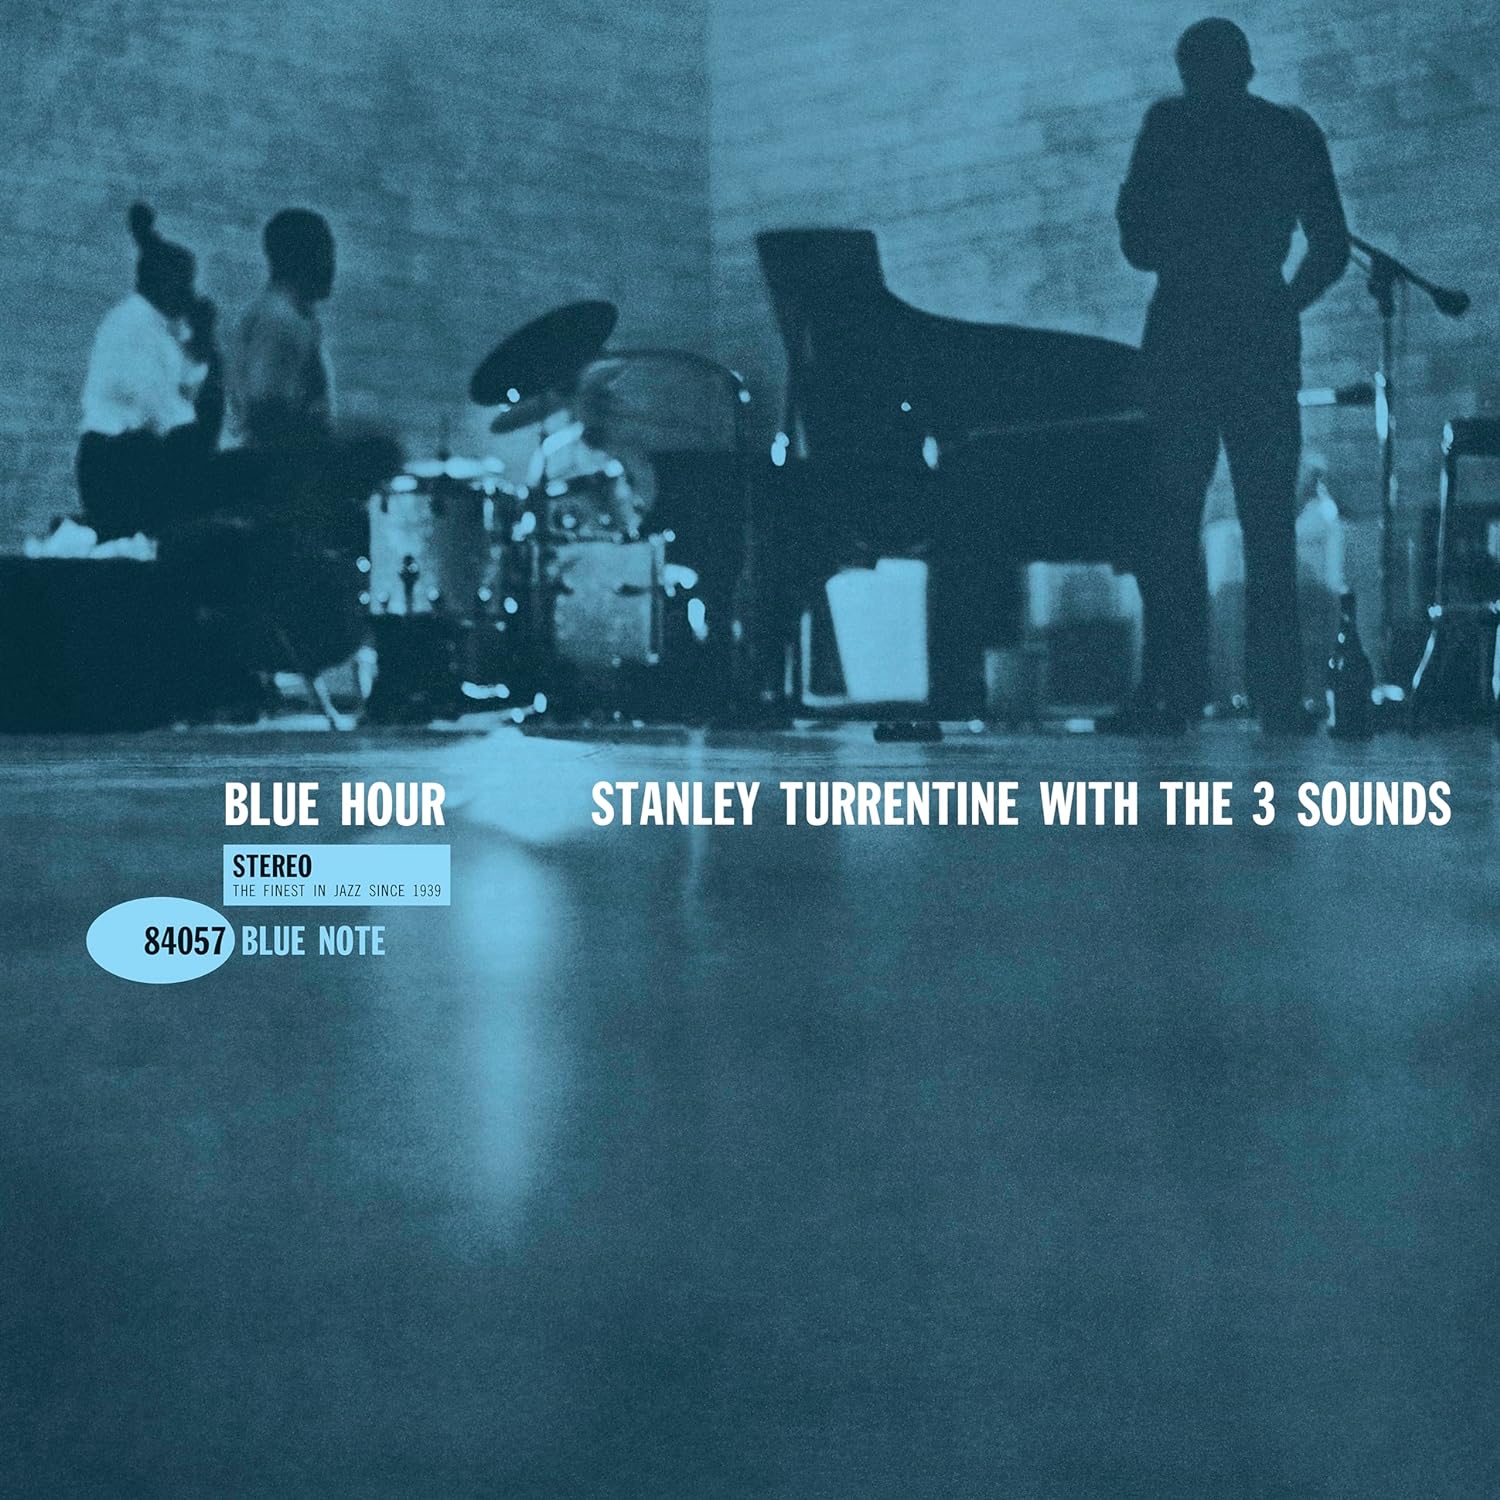 TURRENTINE STANLEY WITH THE 3 SOUNDS – BLUE HOUR LP